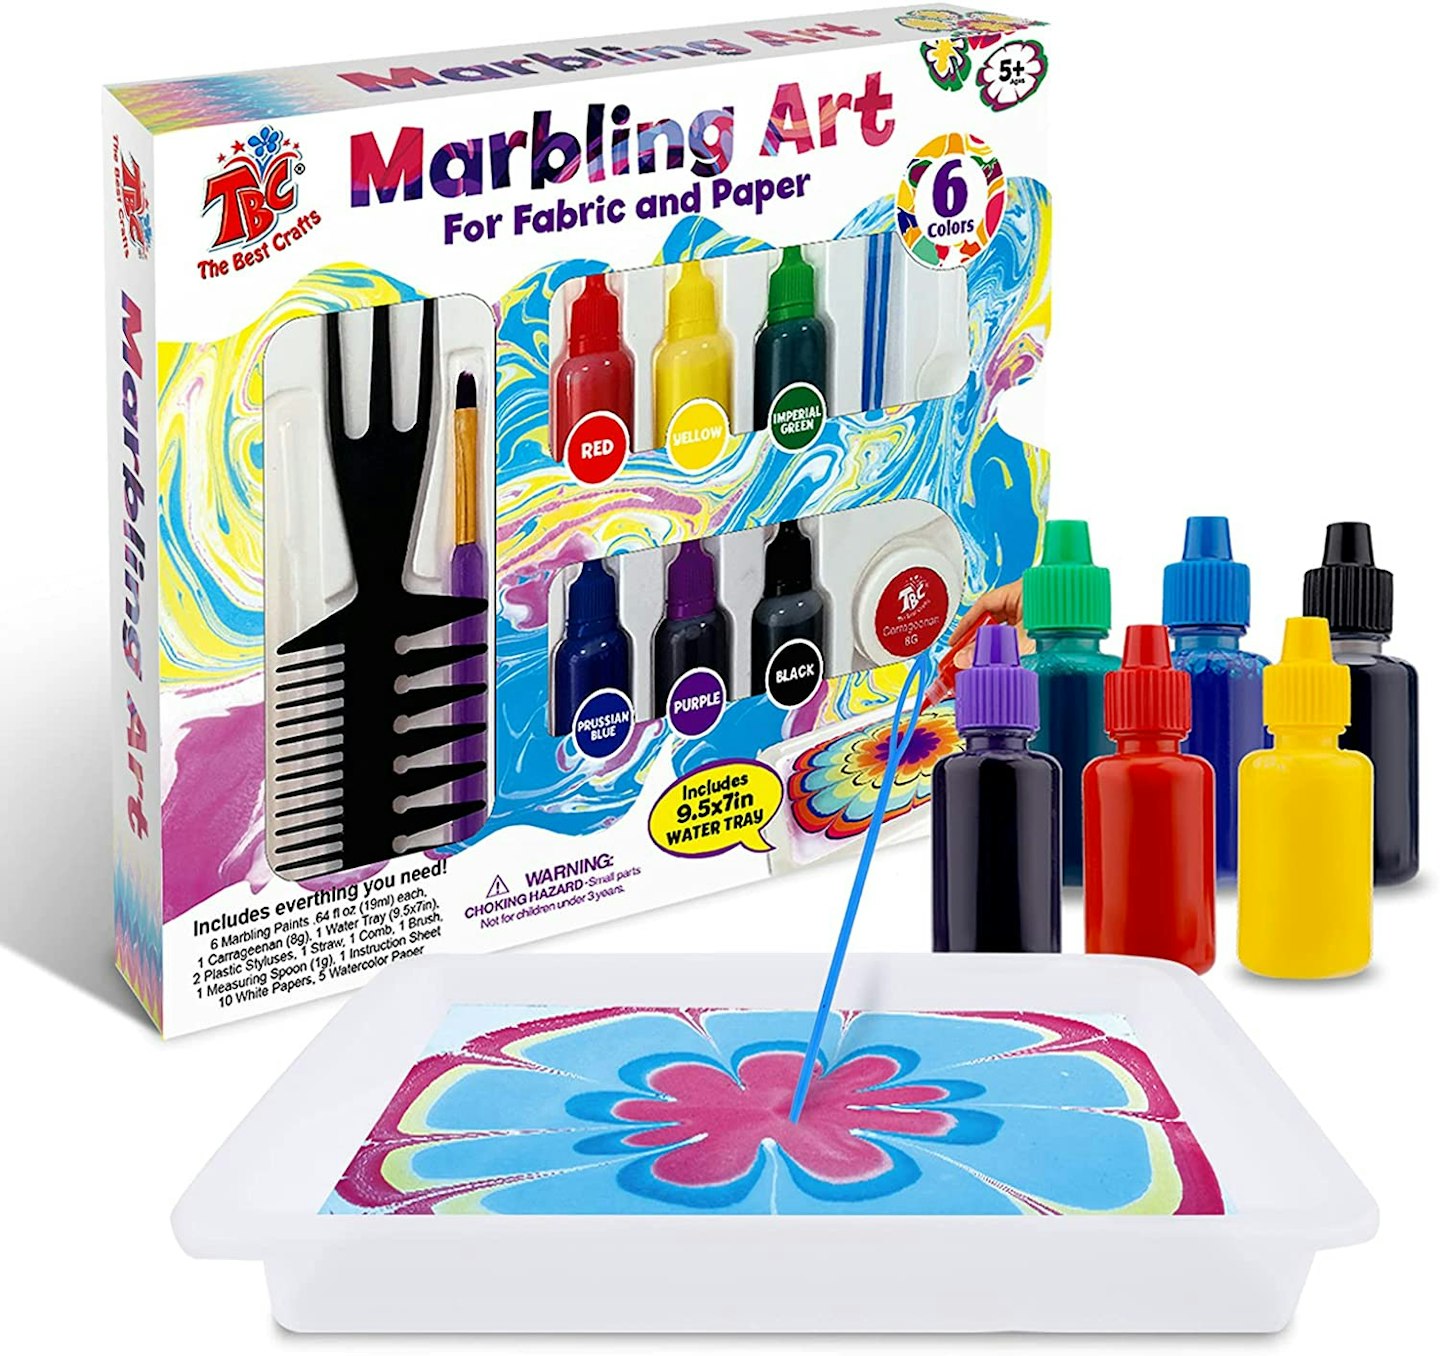 The Best Crafts Marbling Art Paint Kit